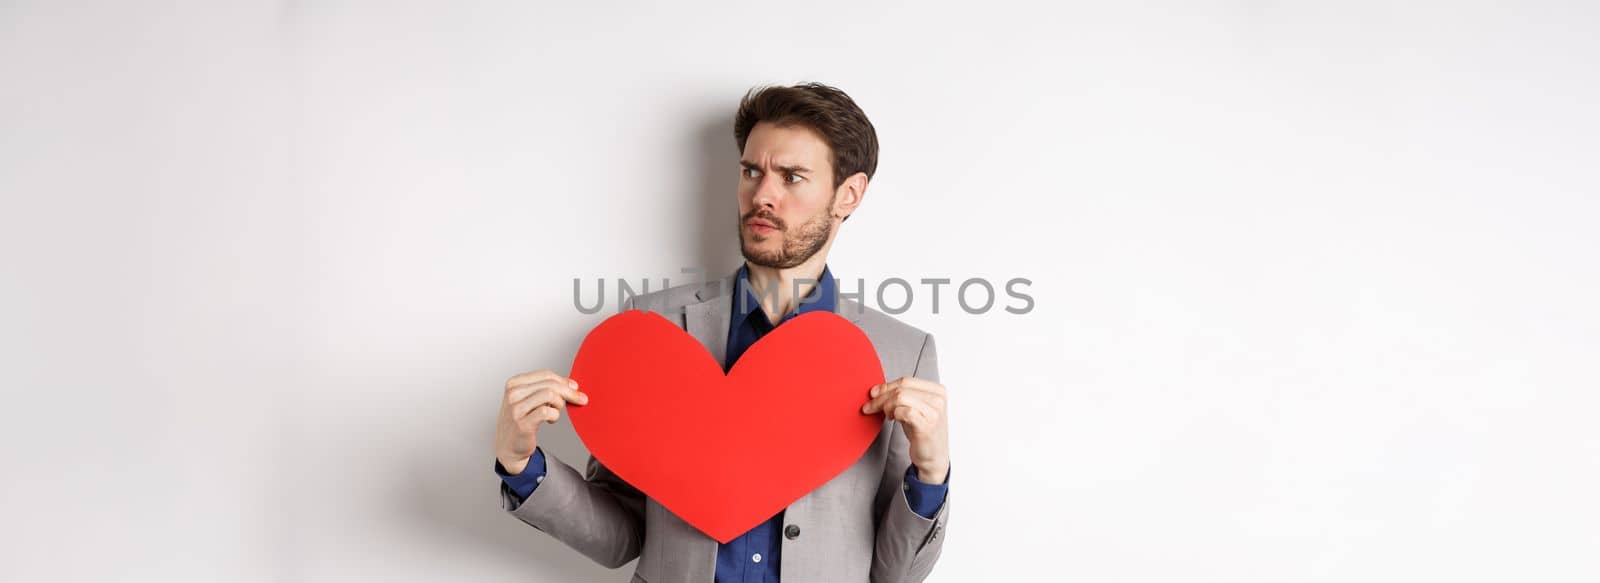 Confused man in suit holding big red heart and looking right, searching for love on Valentines day, standing over white background.